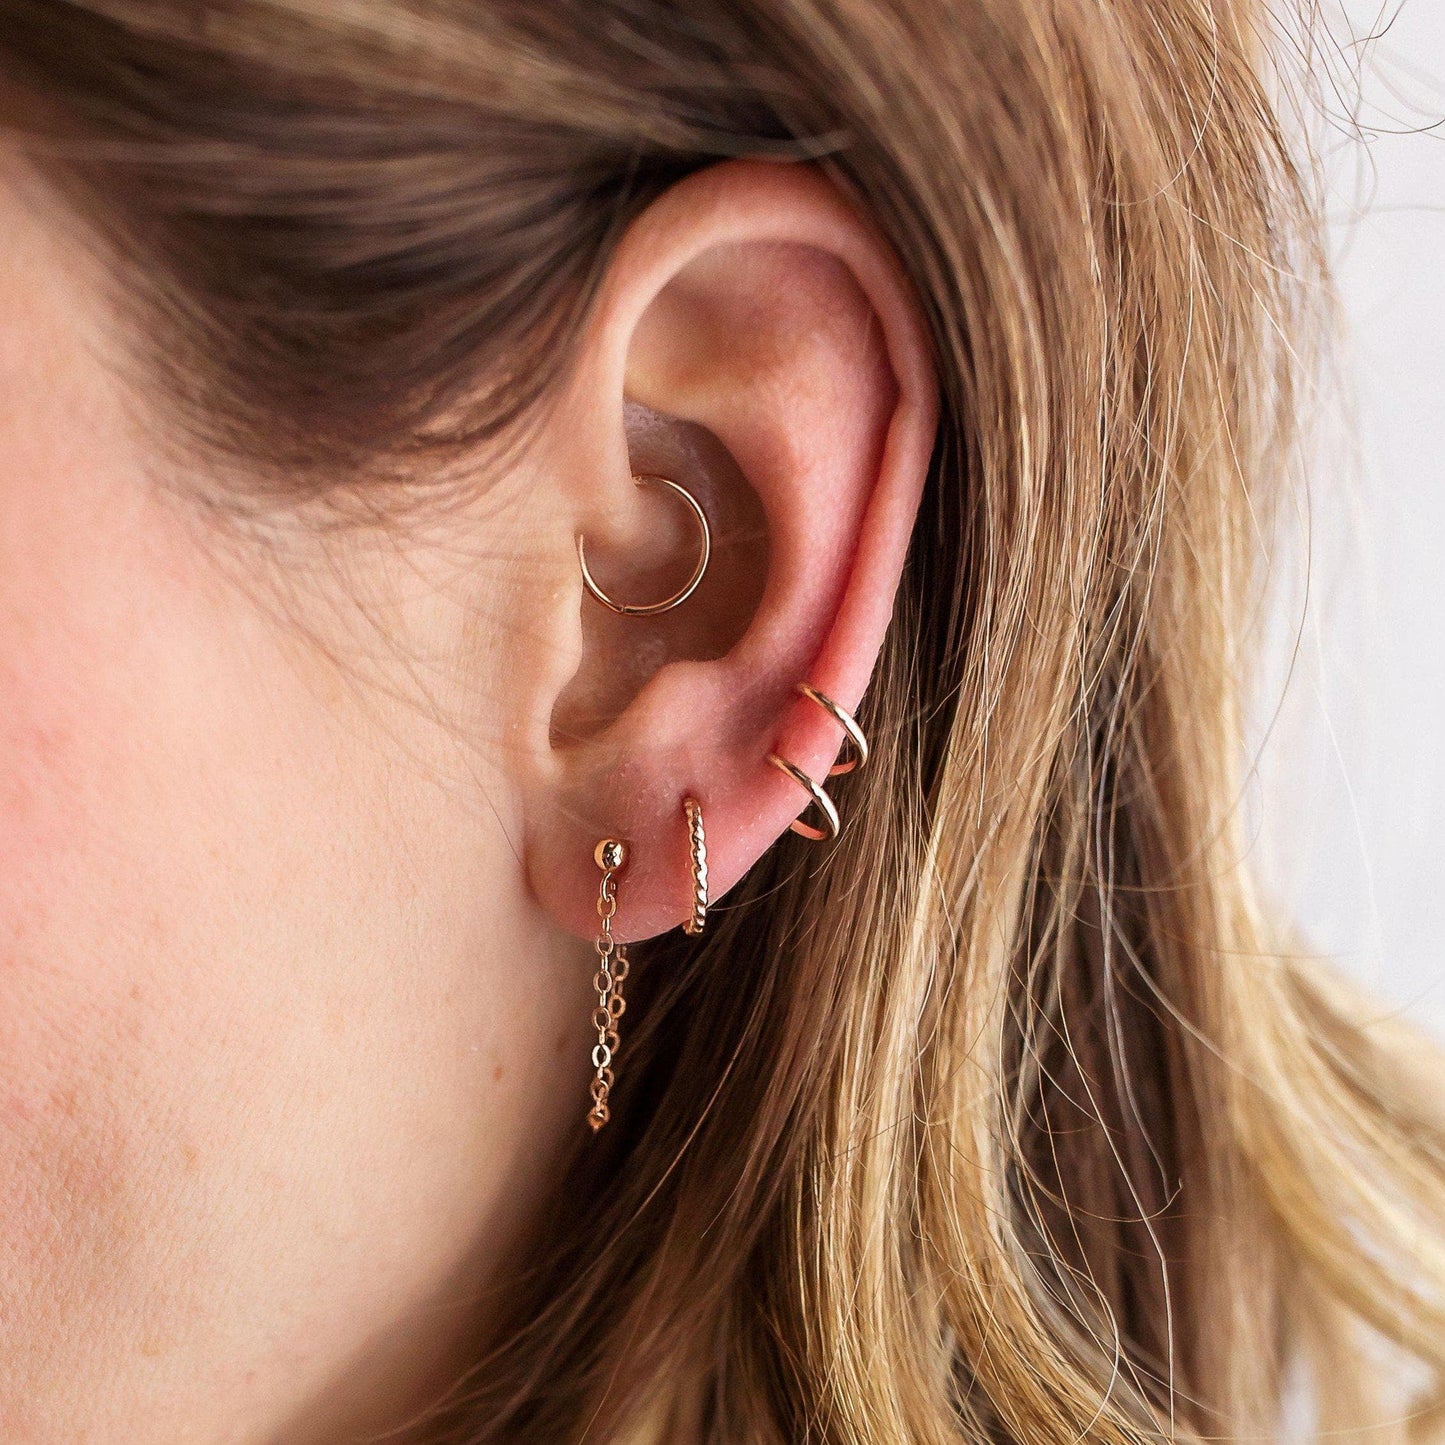 Earring Of The Month - Subscription